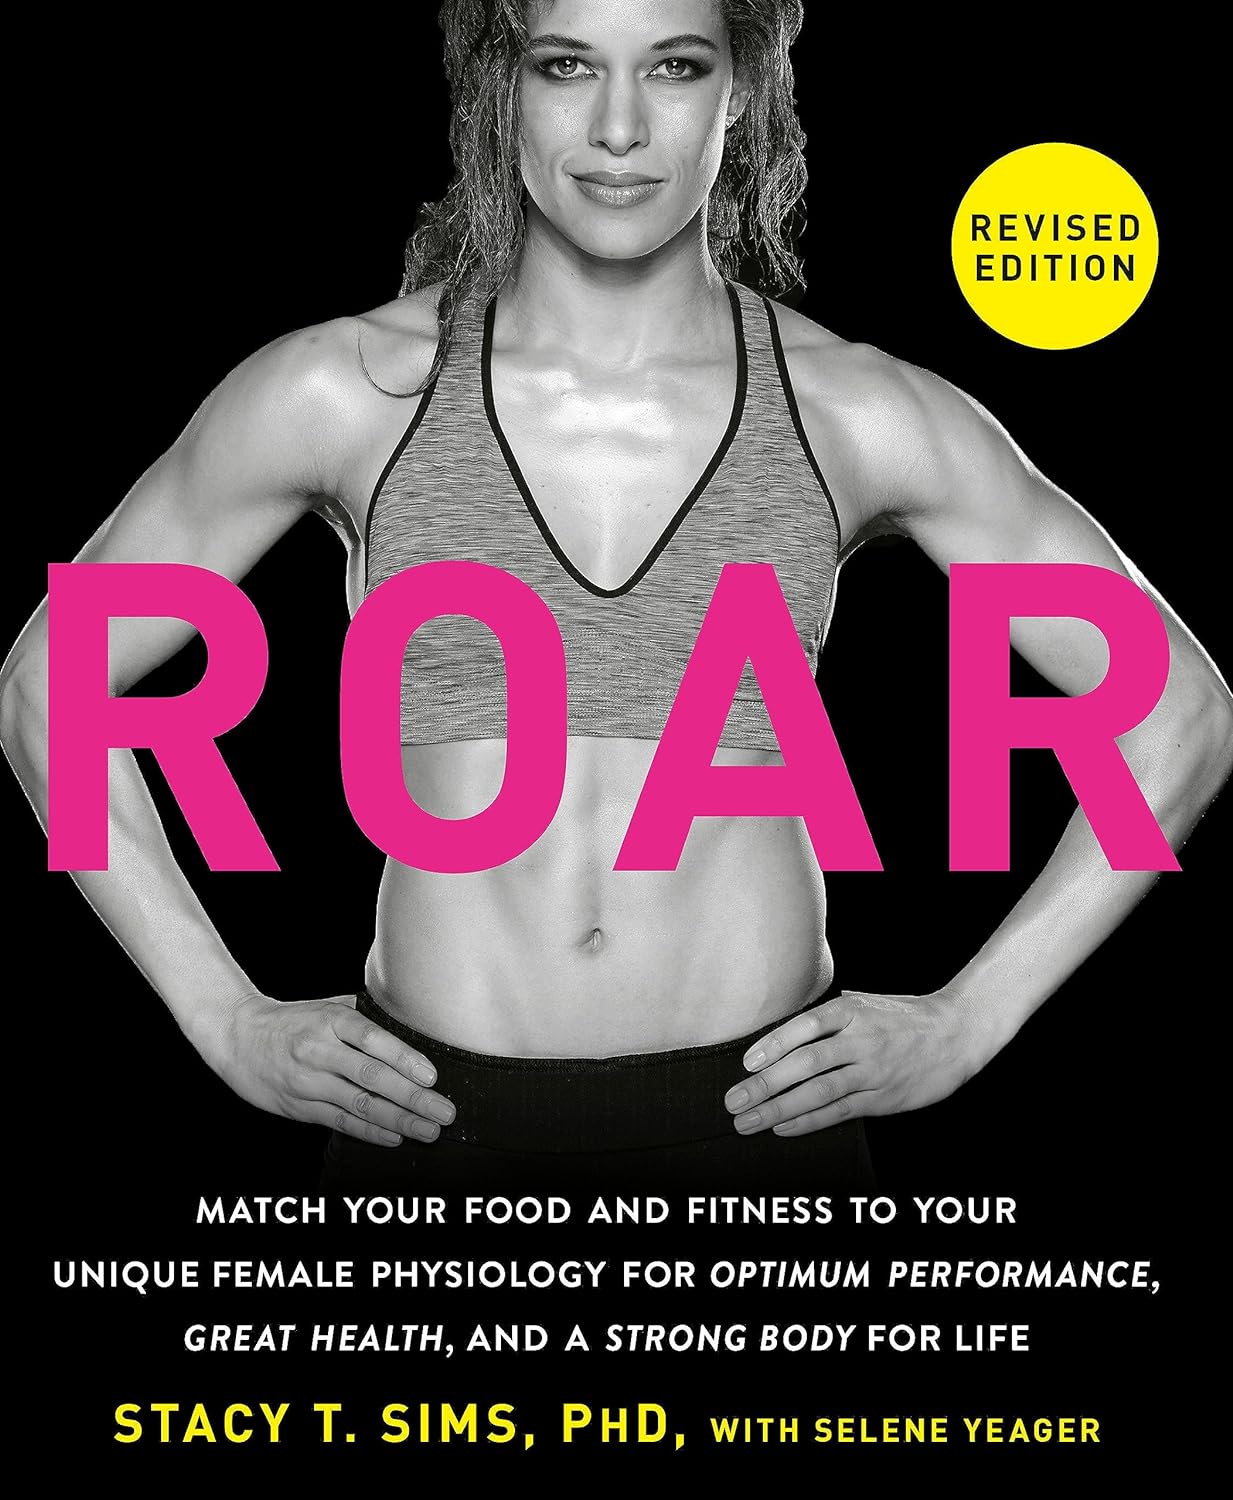 ROAR Revised Edition: Match Your Food and Fitness to Your Unique Female Physiology - SureShot Books Publishing LLC